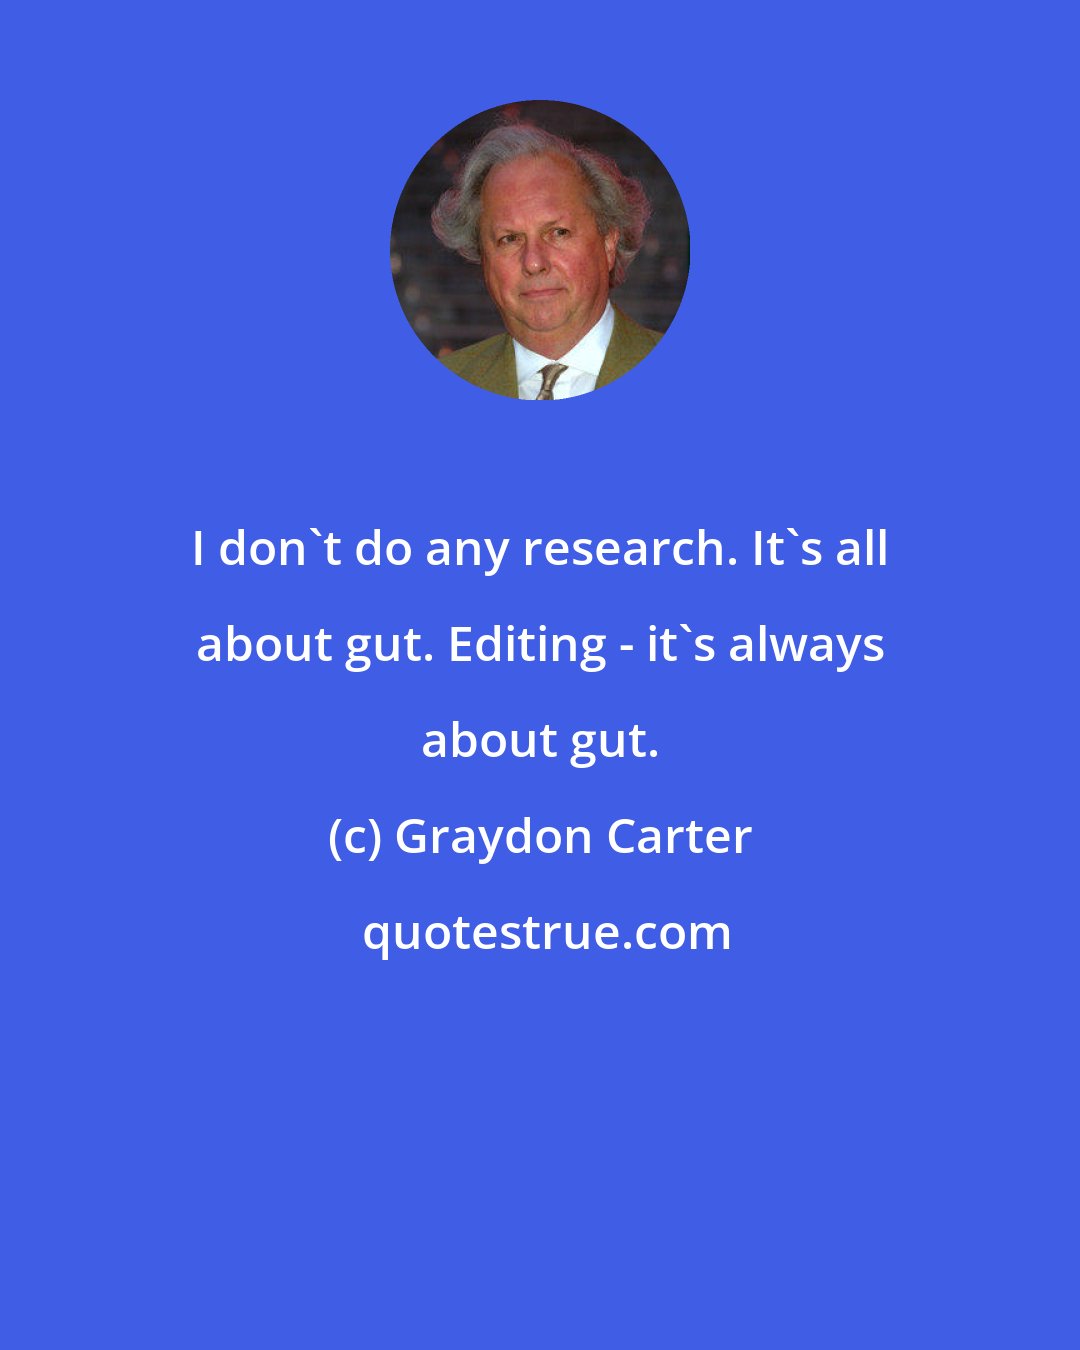 Graydon Carter: I don't do any research. It's all about gut. Editing - it's always about gut.